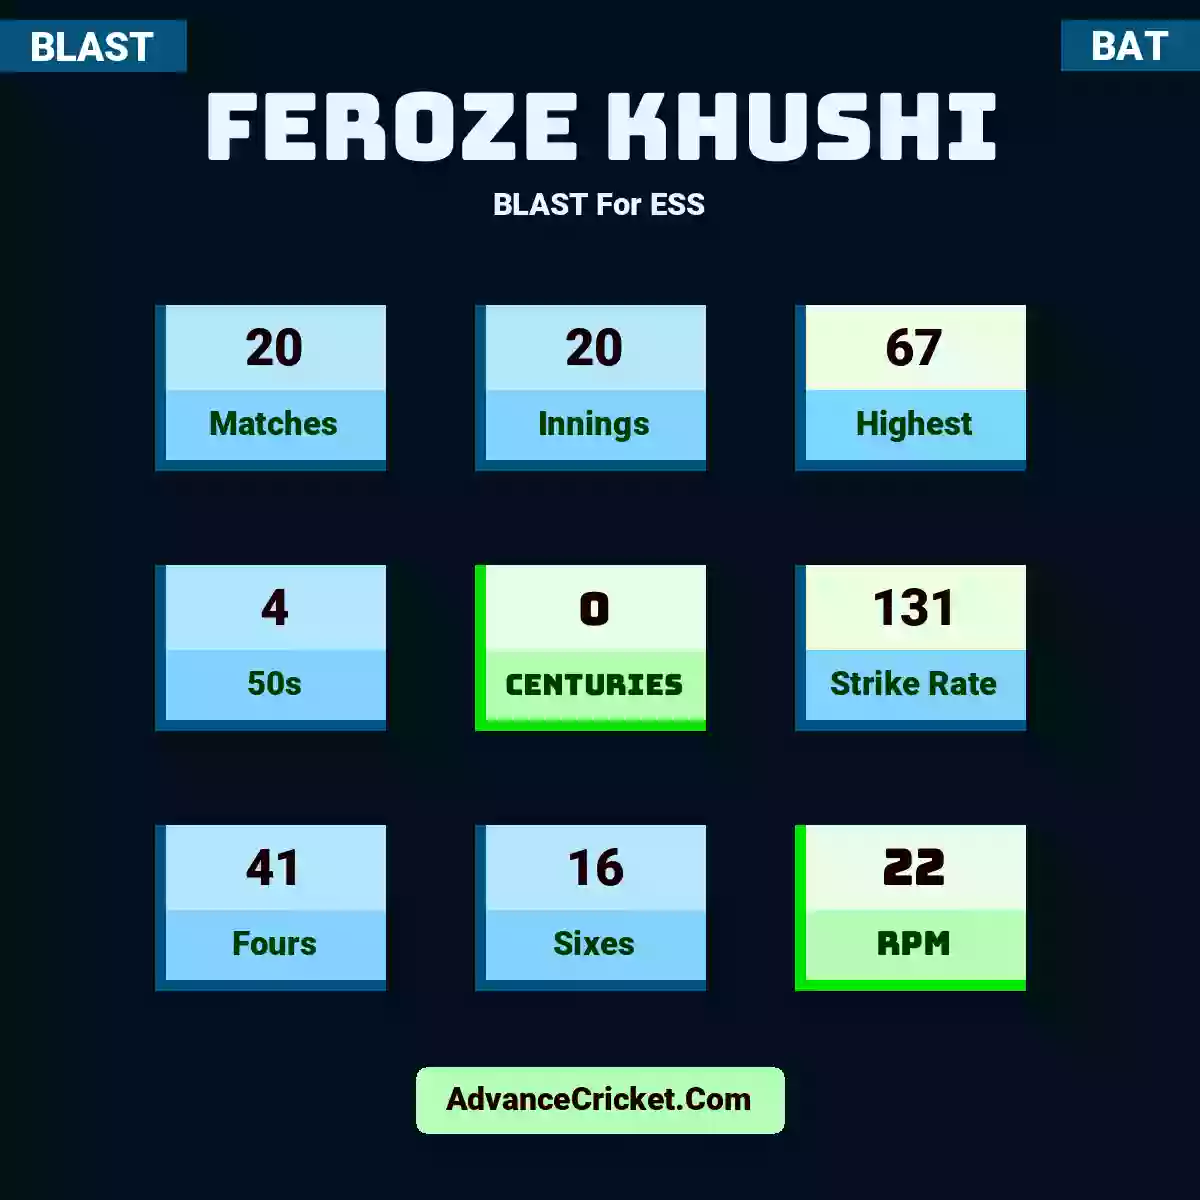 Feroze Khushi BLAST  For ESS, Feroze Khushi played 20 matches, scored 67 runs as highest, 4 half-centuries, and 0 centuries, with a strike rate of 131. F.Khushi hit 41 fours and 16 sixes, with an RPM of 22.